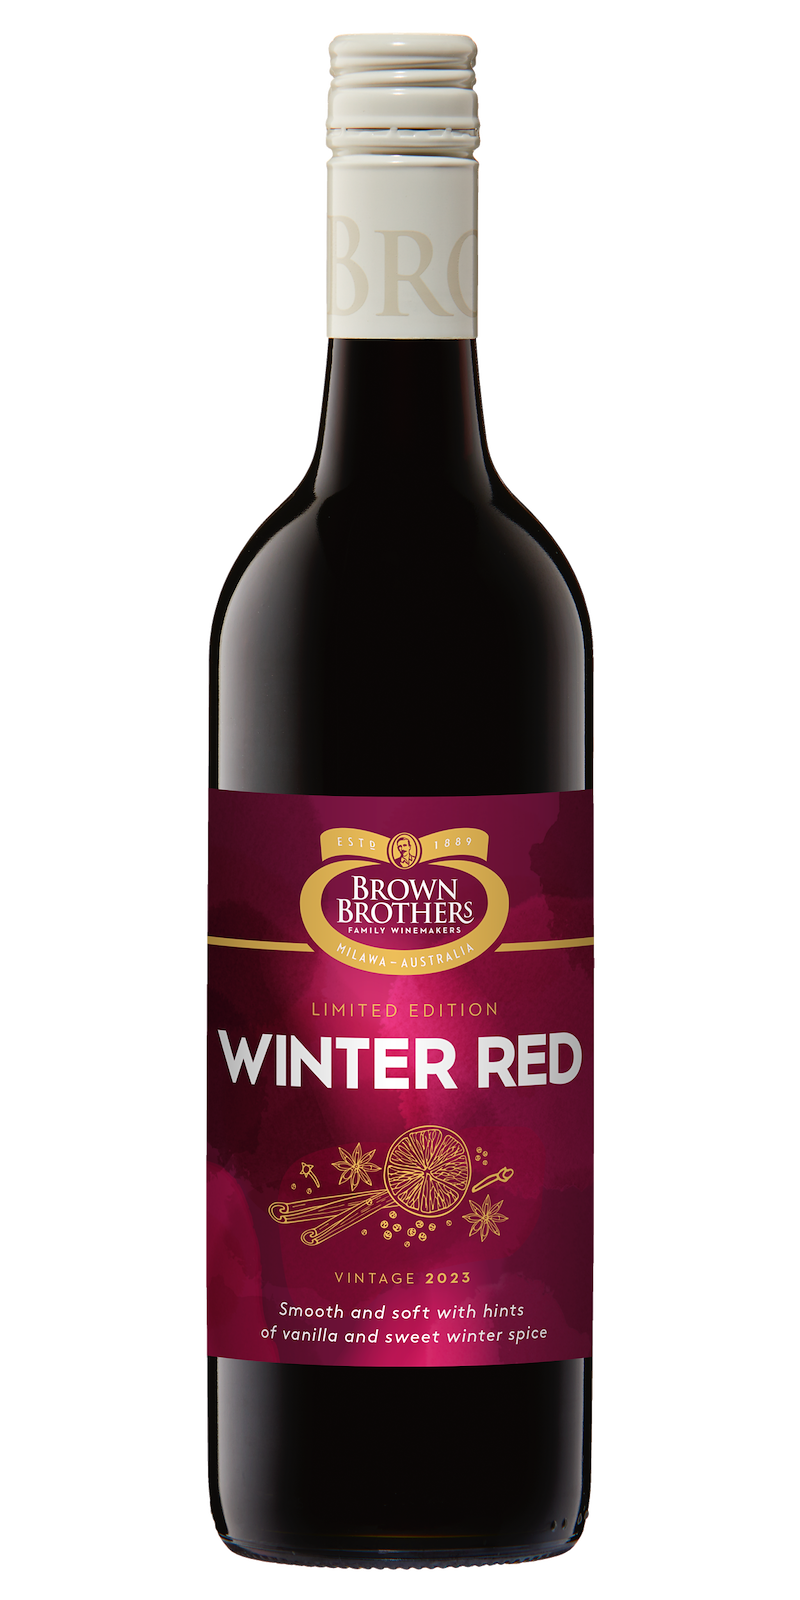 Limited Edition Winter Red 2023